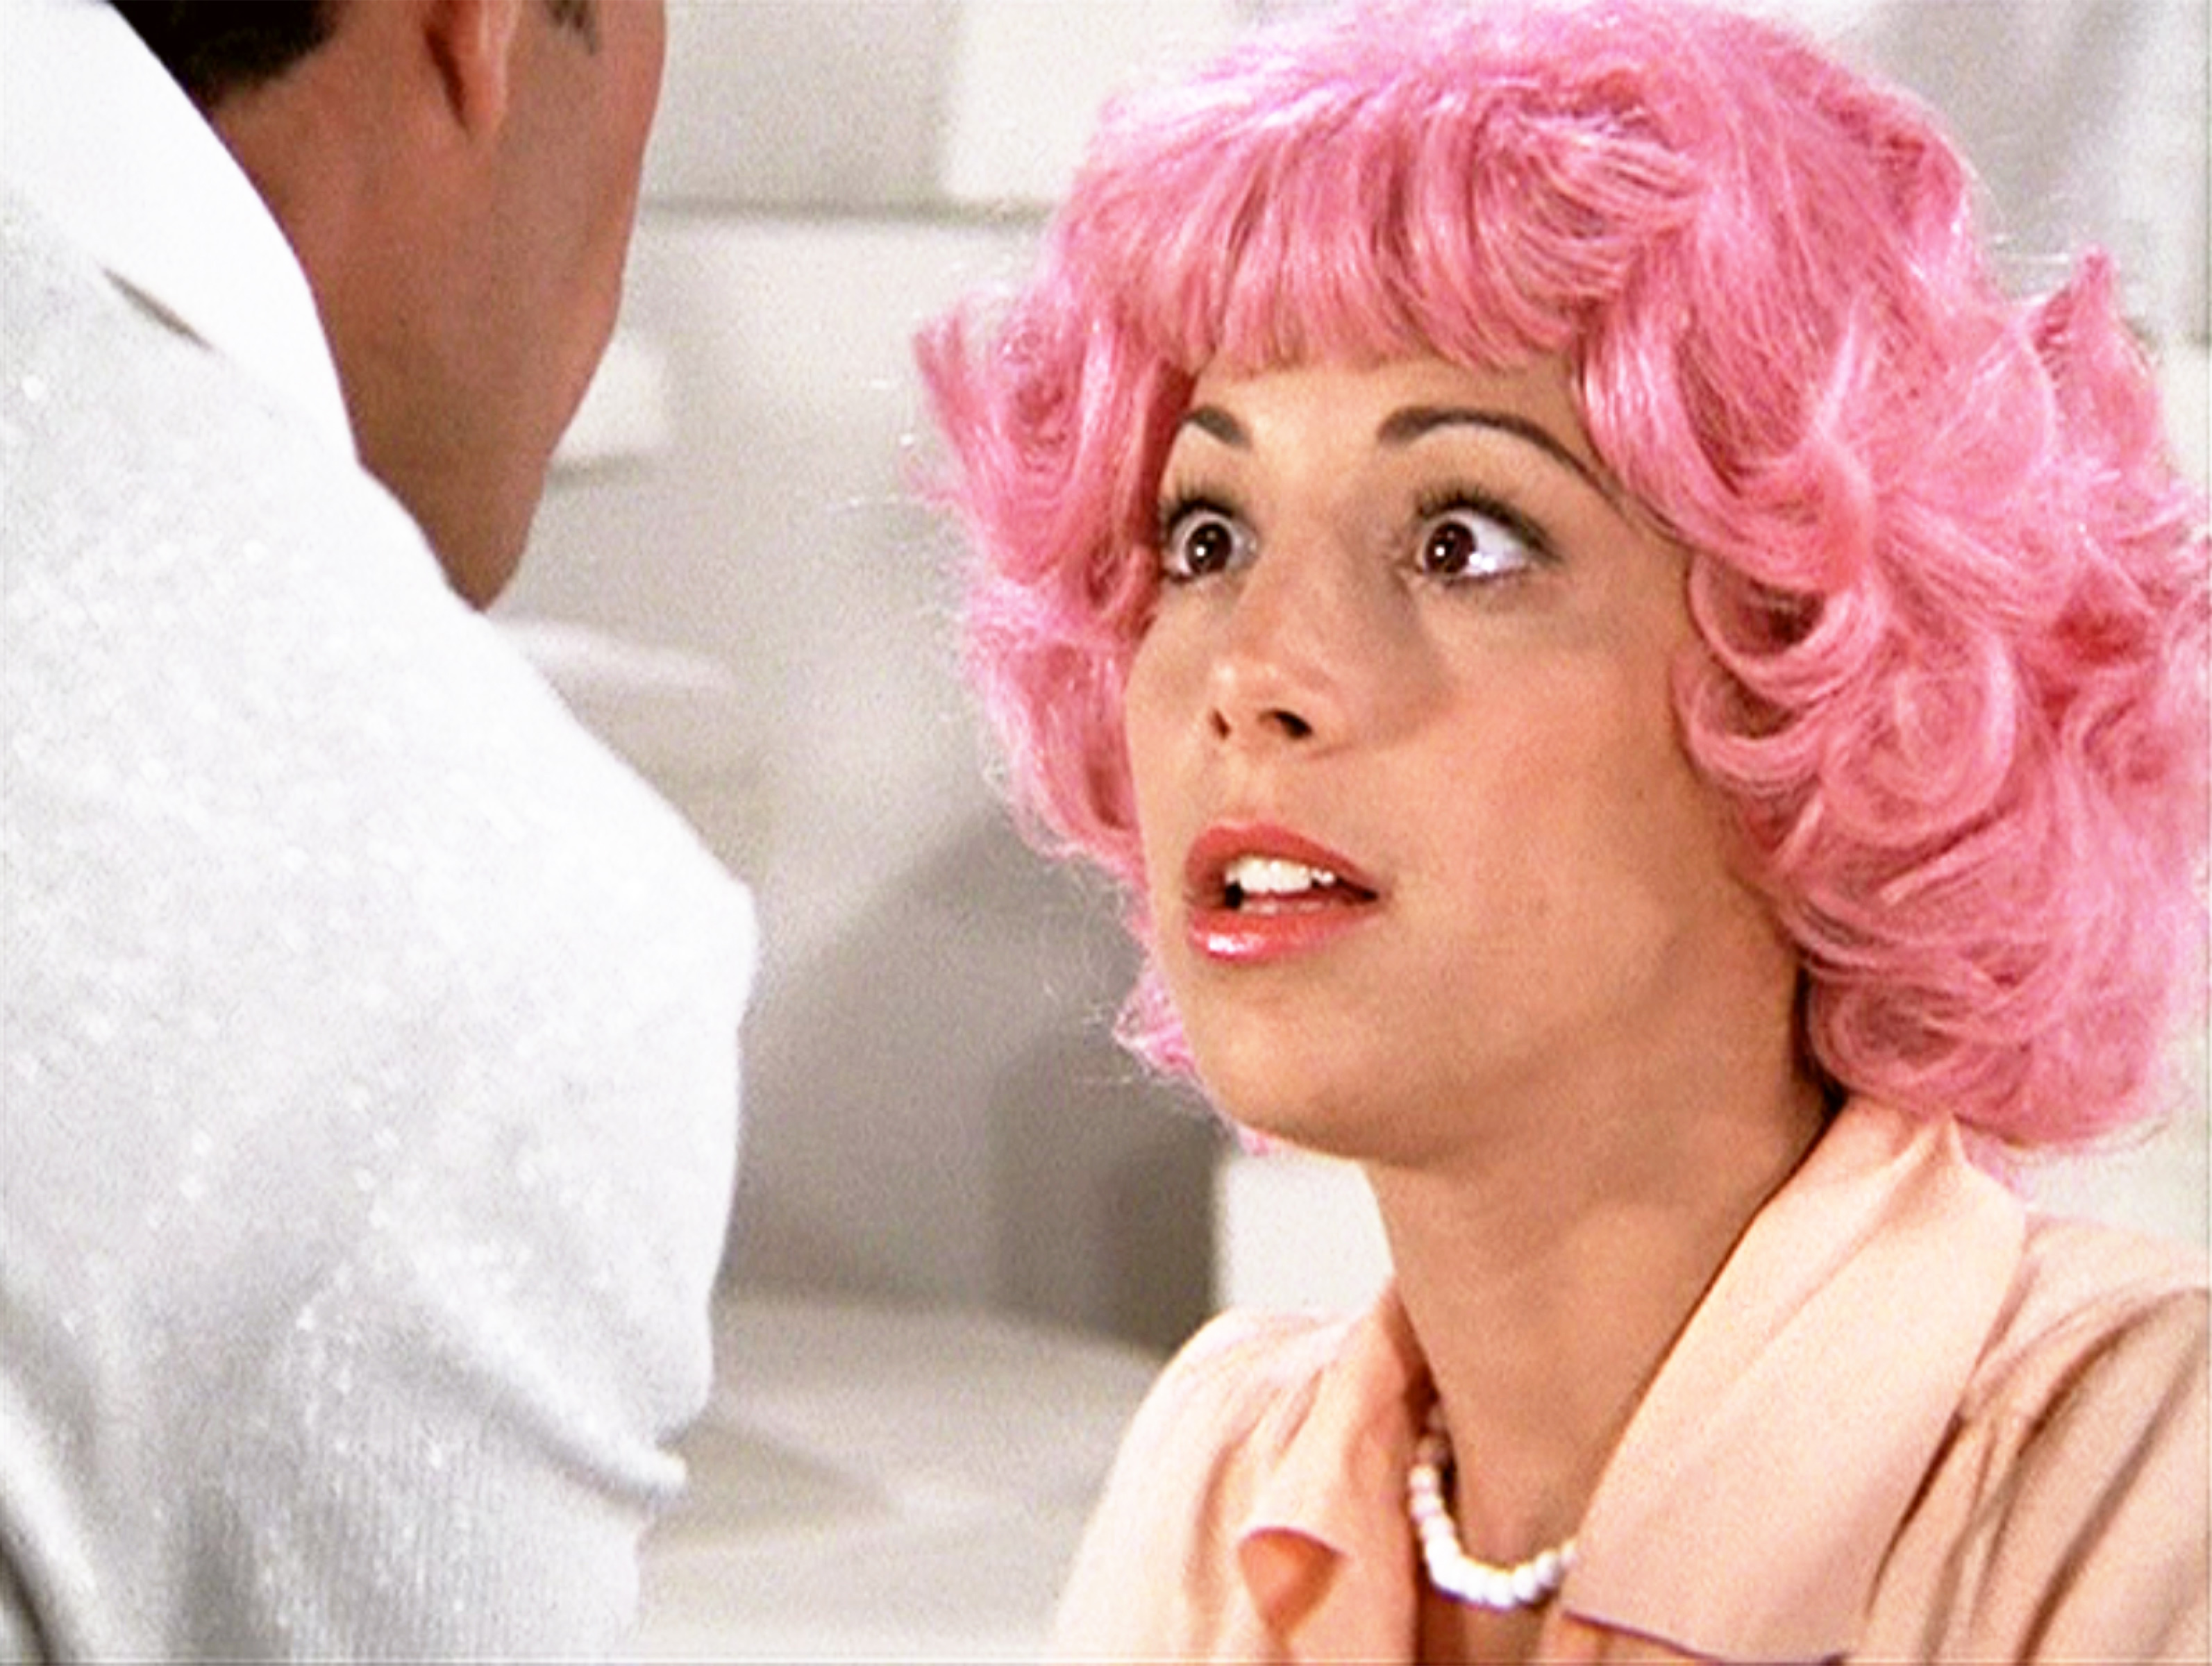 Didi Conn pictured as Frenchy in the film "Grease" on June 16, 1978. | Source: Getty Images